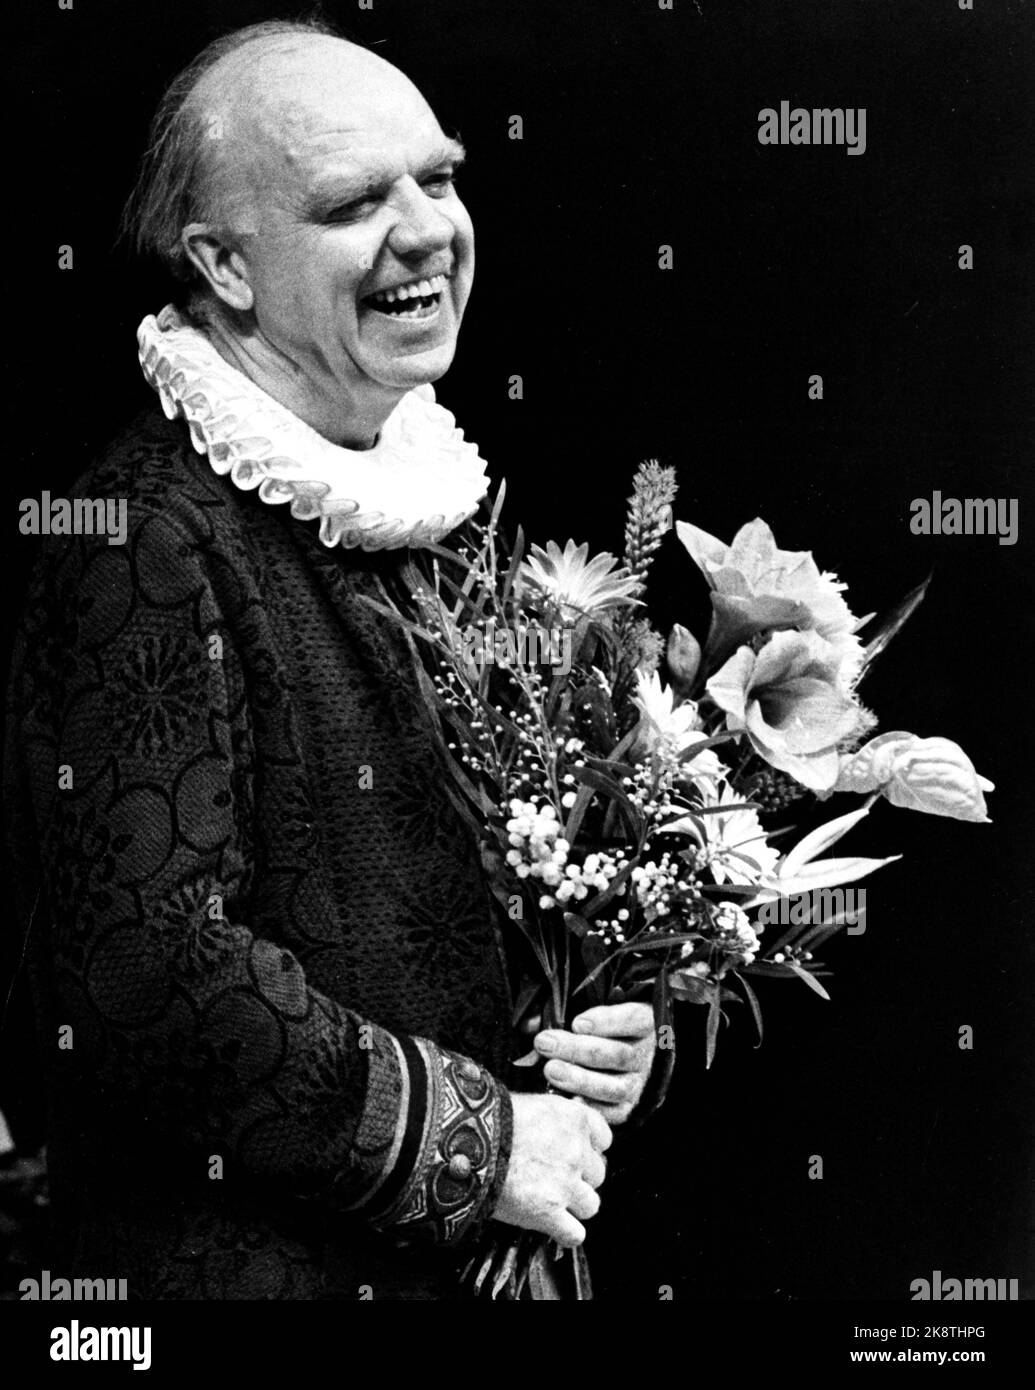 Oslo 19781117. Actor Henki Kolstad celebrates his 40th anniversary as an actor with a performance of 'The Great' at the National Theater. Here he is on stage in costume with a priest's dress and priestly collar, smiling with flowers. Ntb archive / ntb Stock Photo